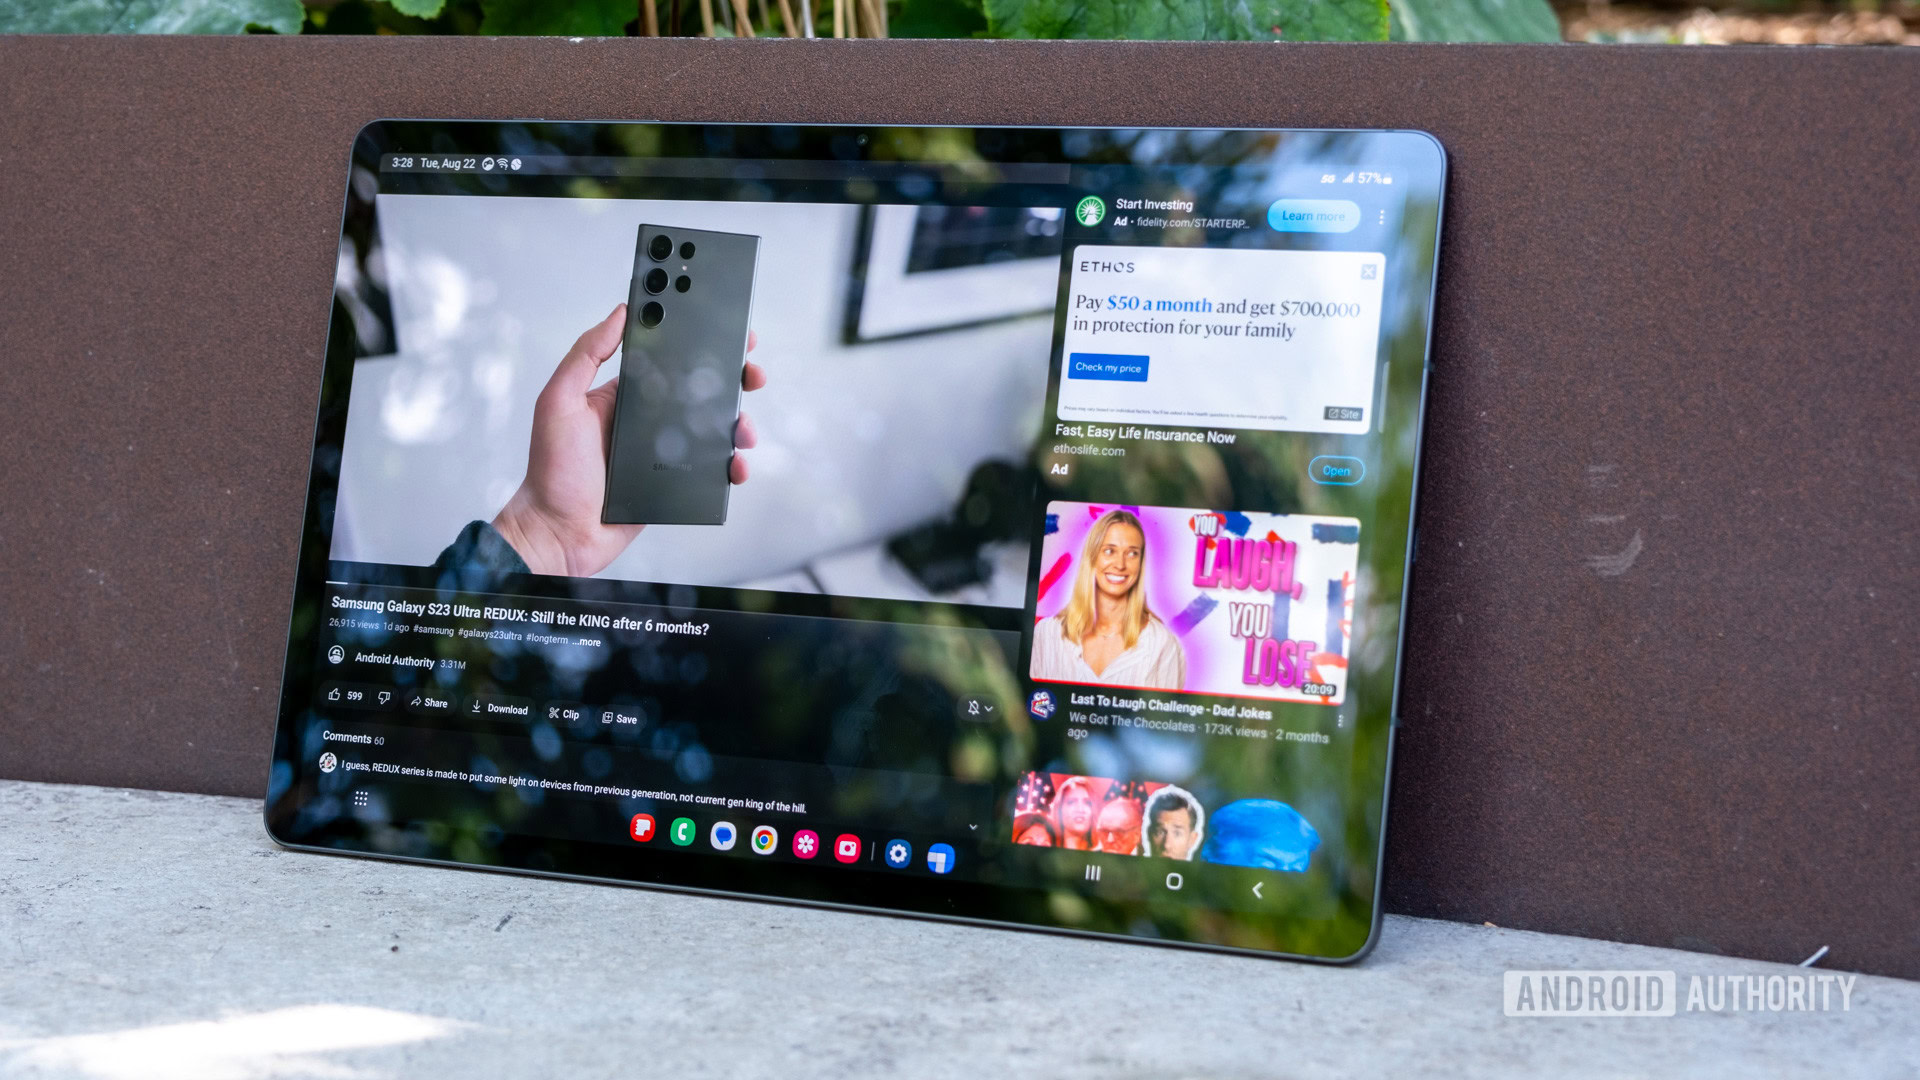 Samsung Galaxy Tab S9 Plus review: Should you buy it?